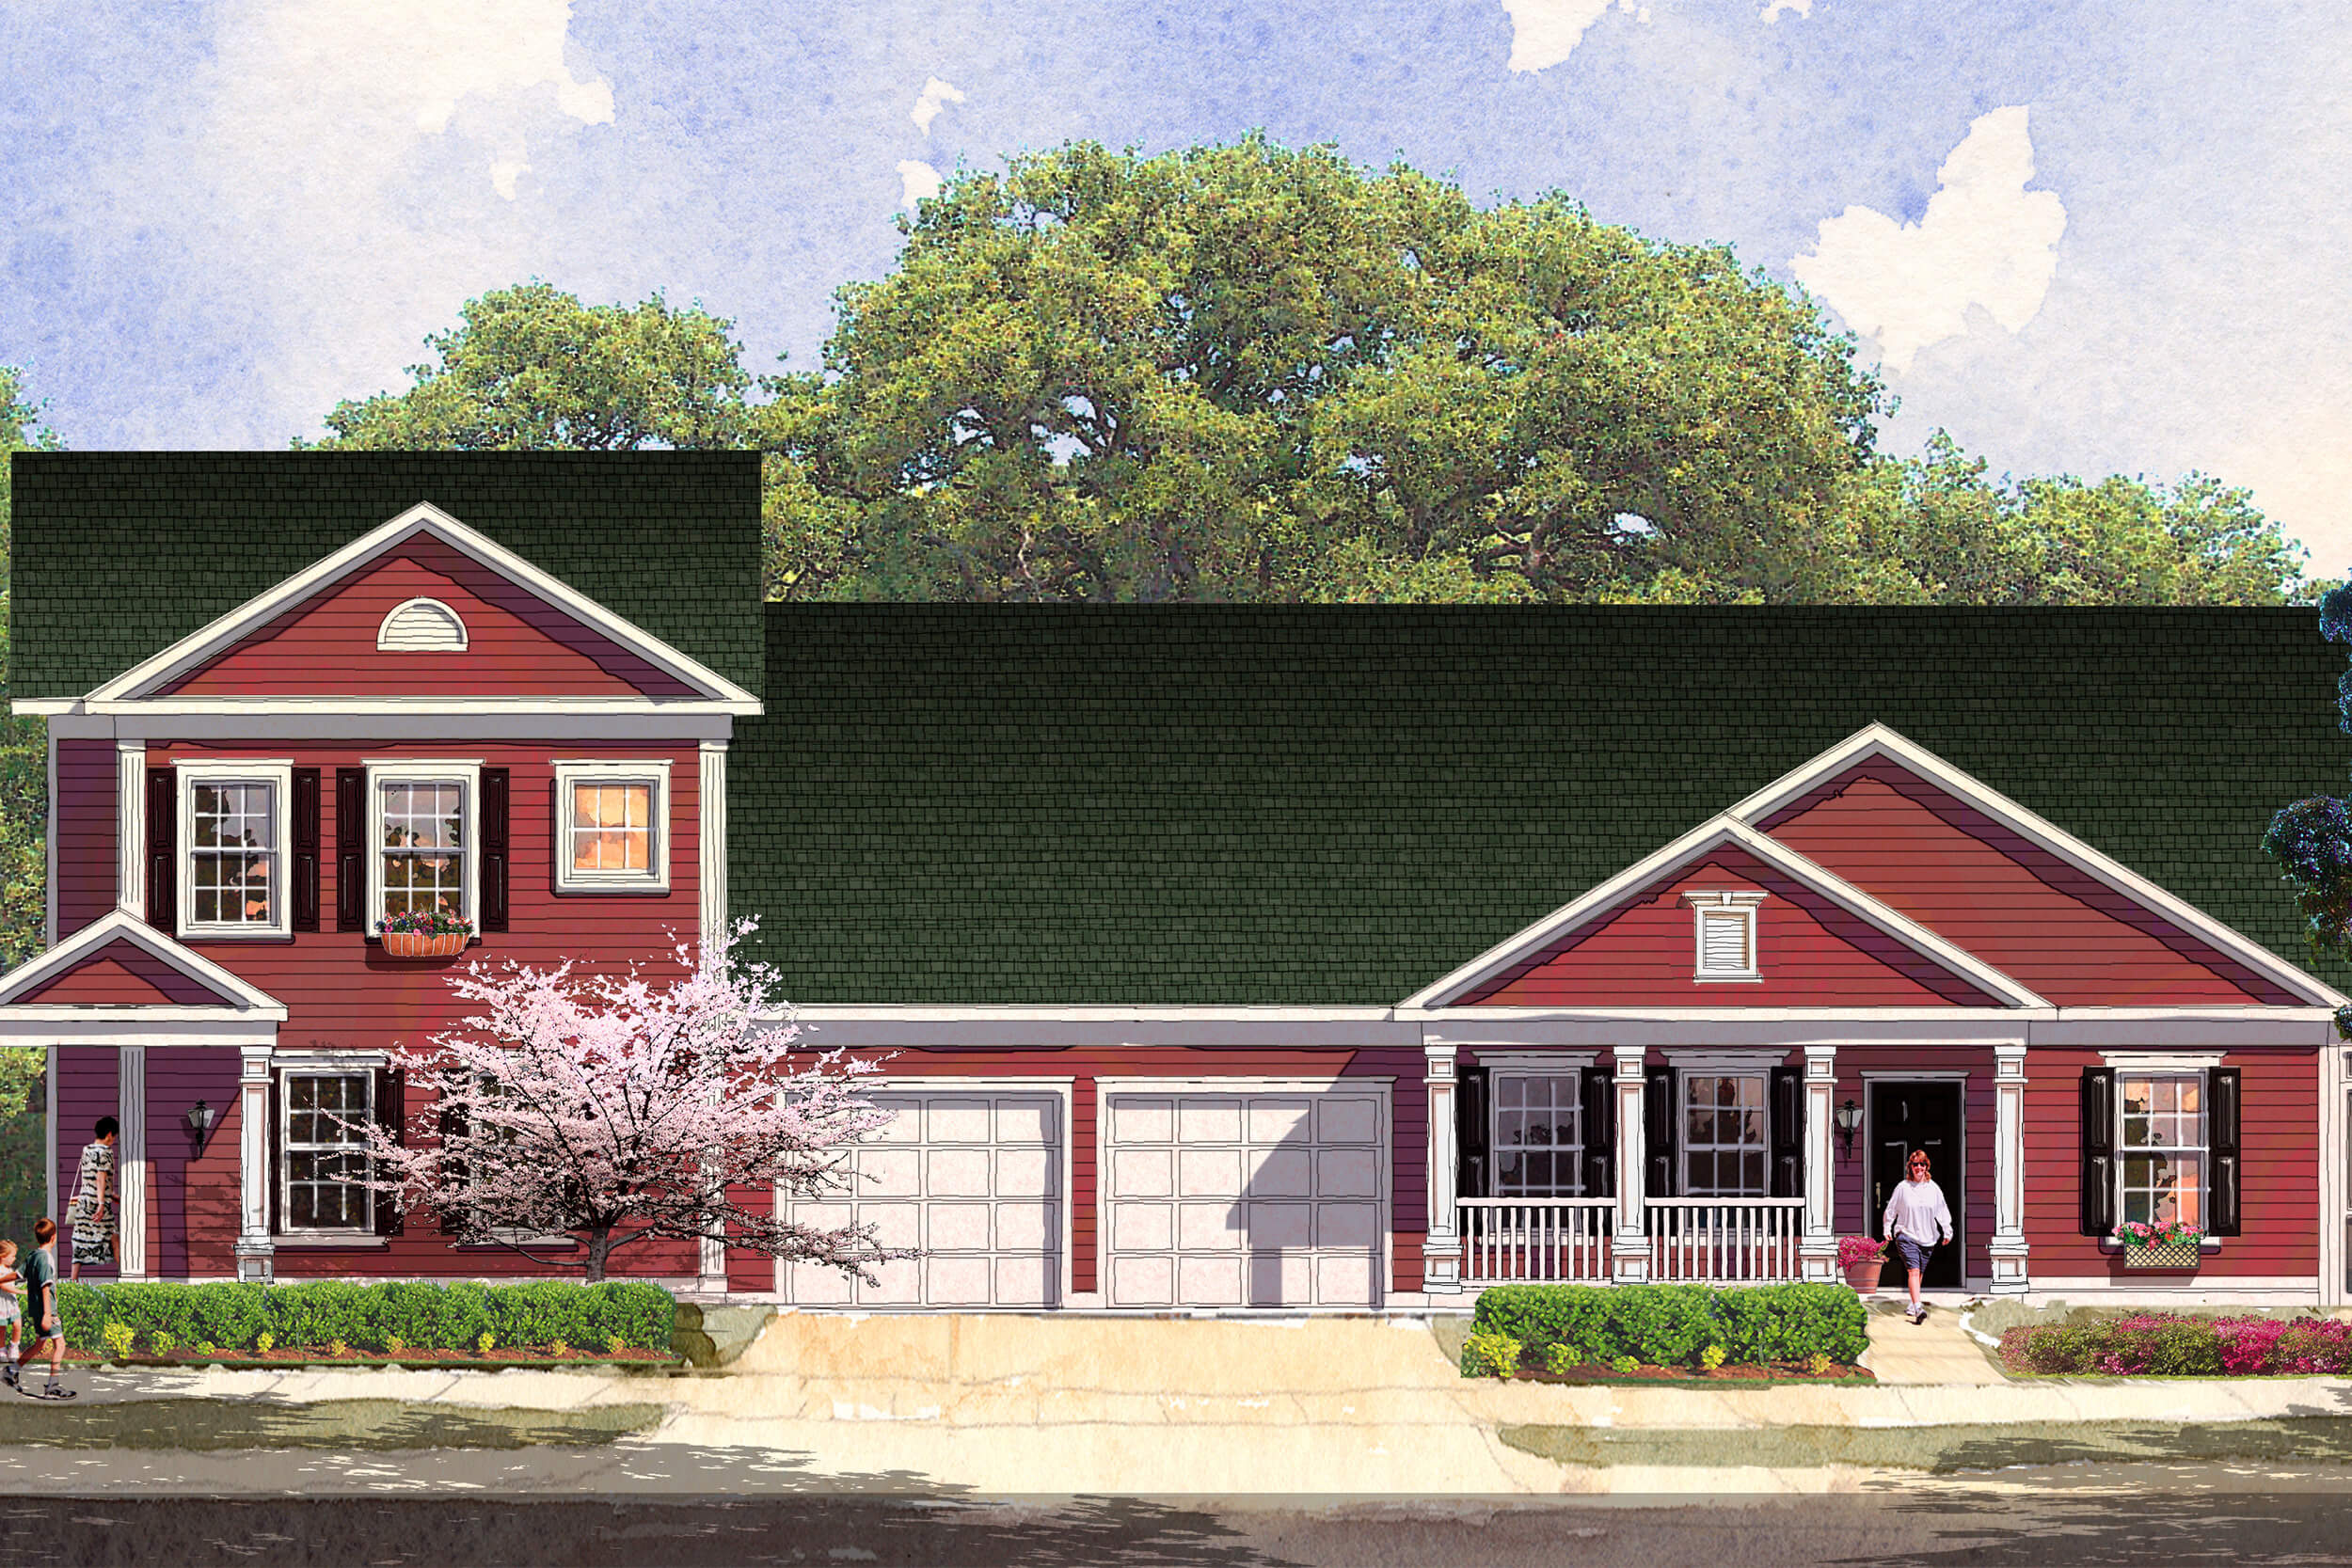 A 3D artist's rendering of the facade of a housing unit at Camp Lejeuene. The rendering is shown facing directly at the front of the building, which features red siding, white trim, black window shutters, and a two bay garage in the center of the housing unit.